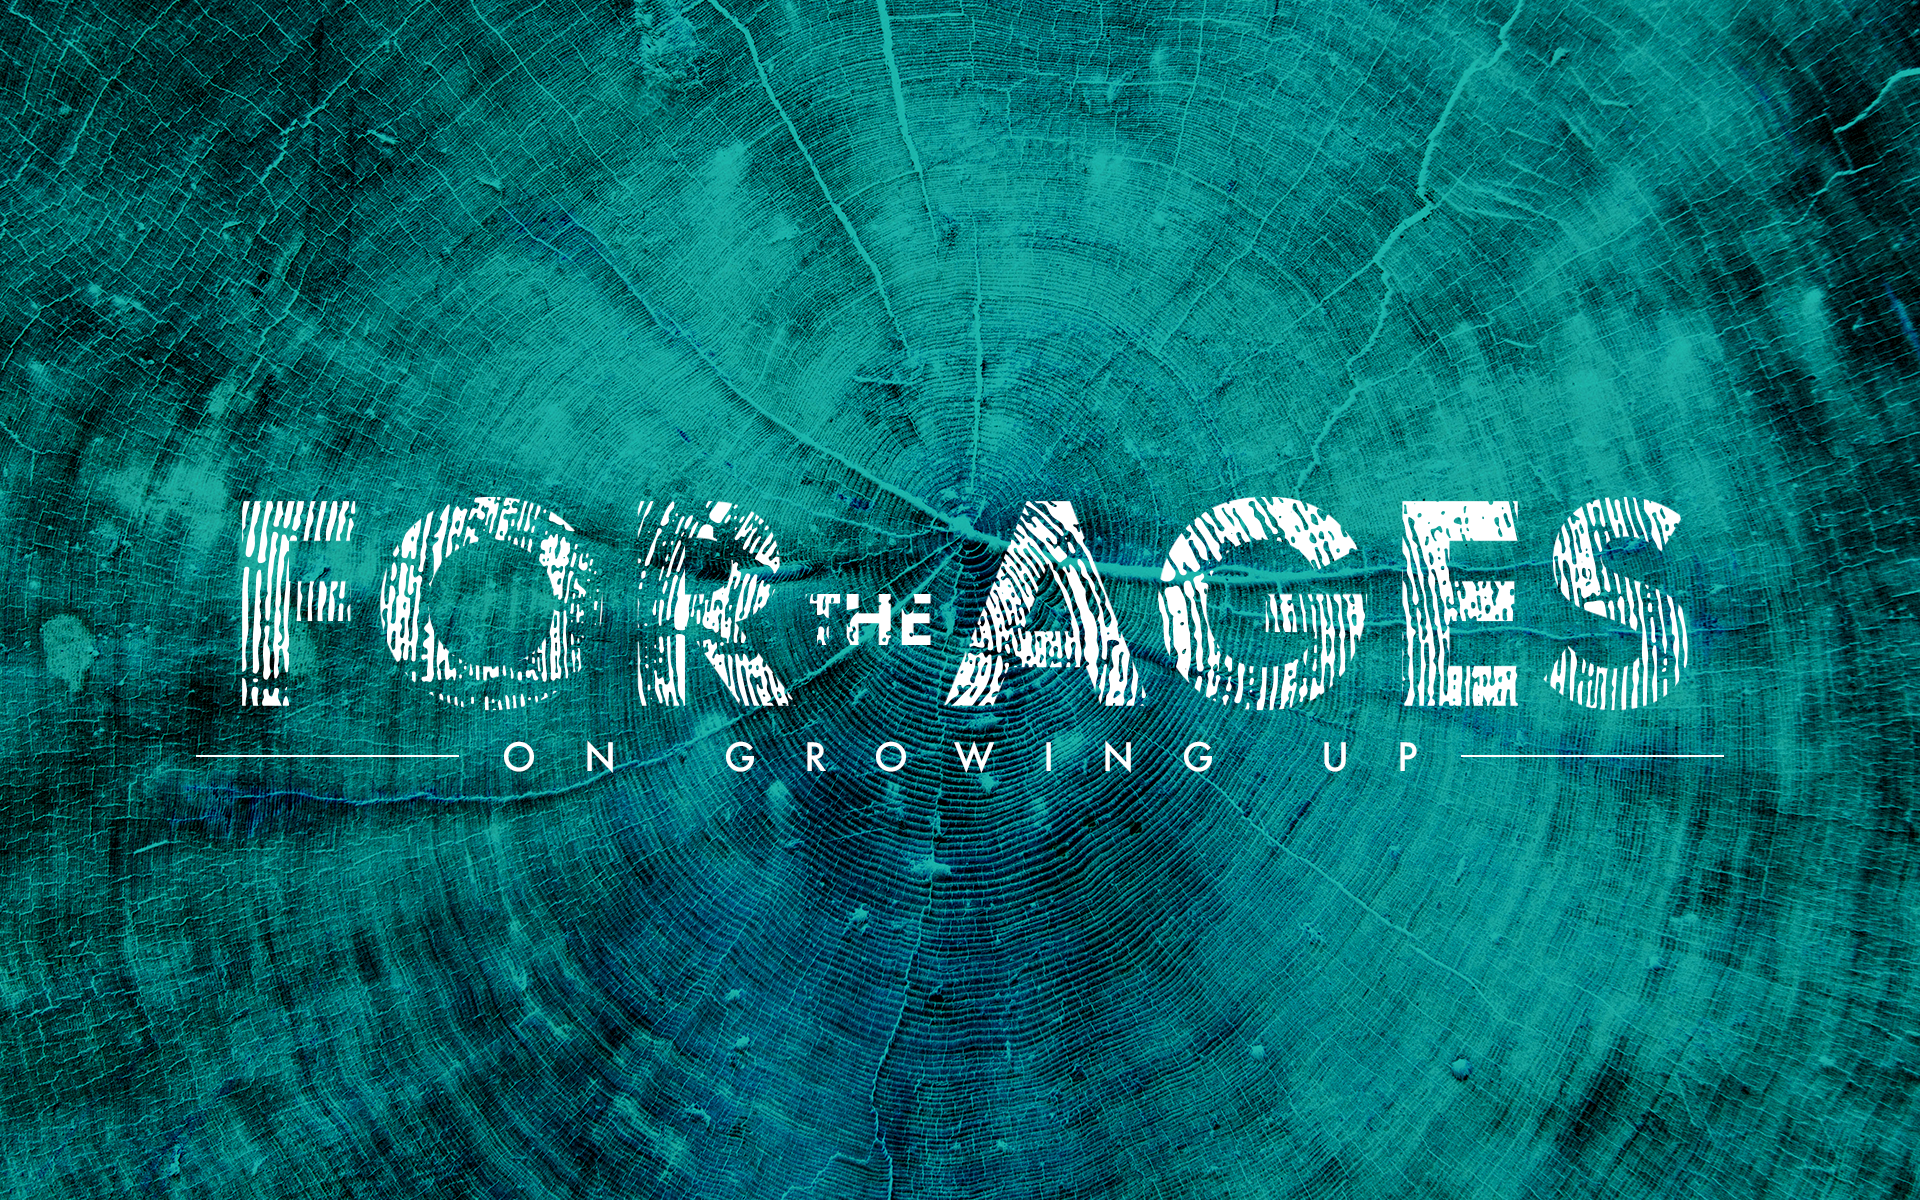 Issue.24: For The Ages: On Growing Up